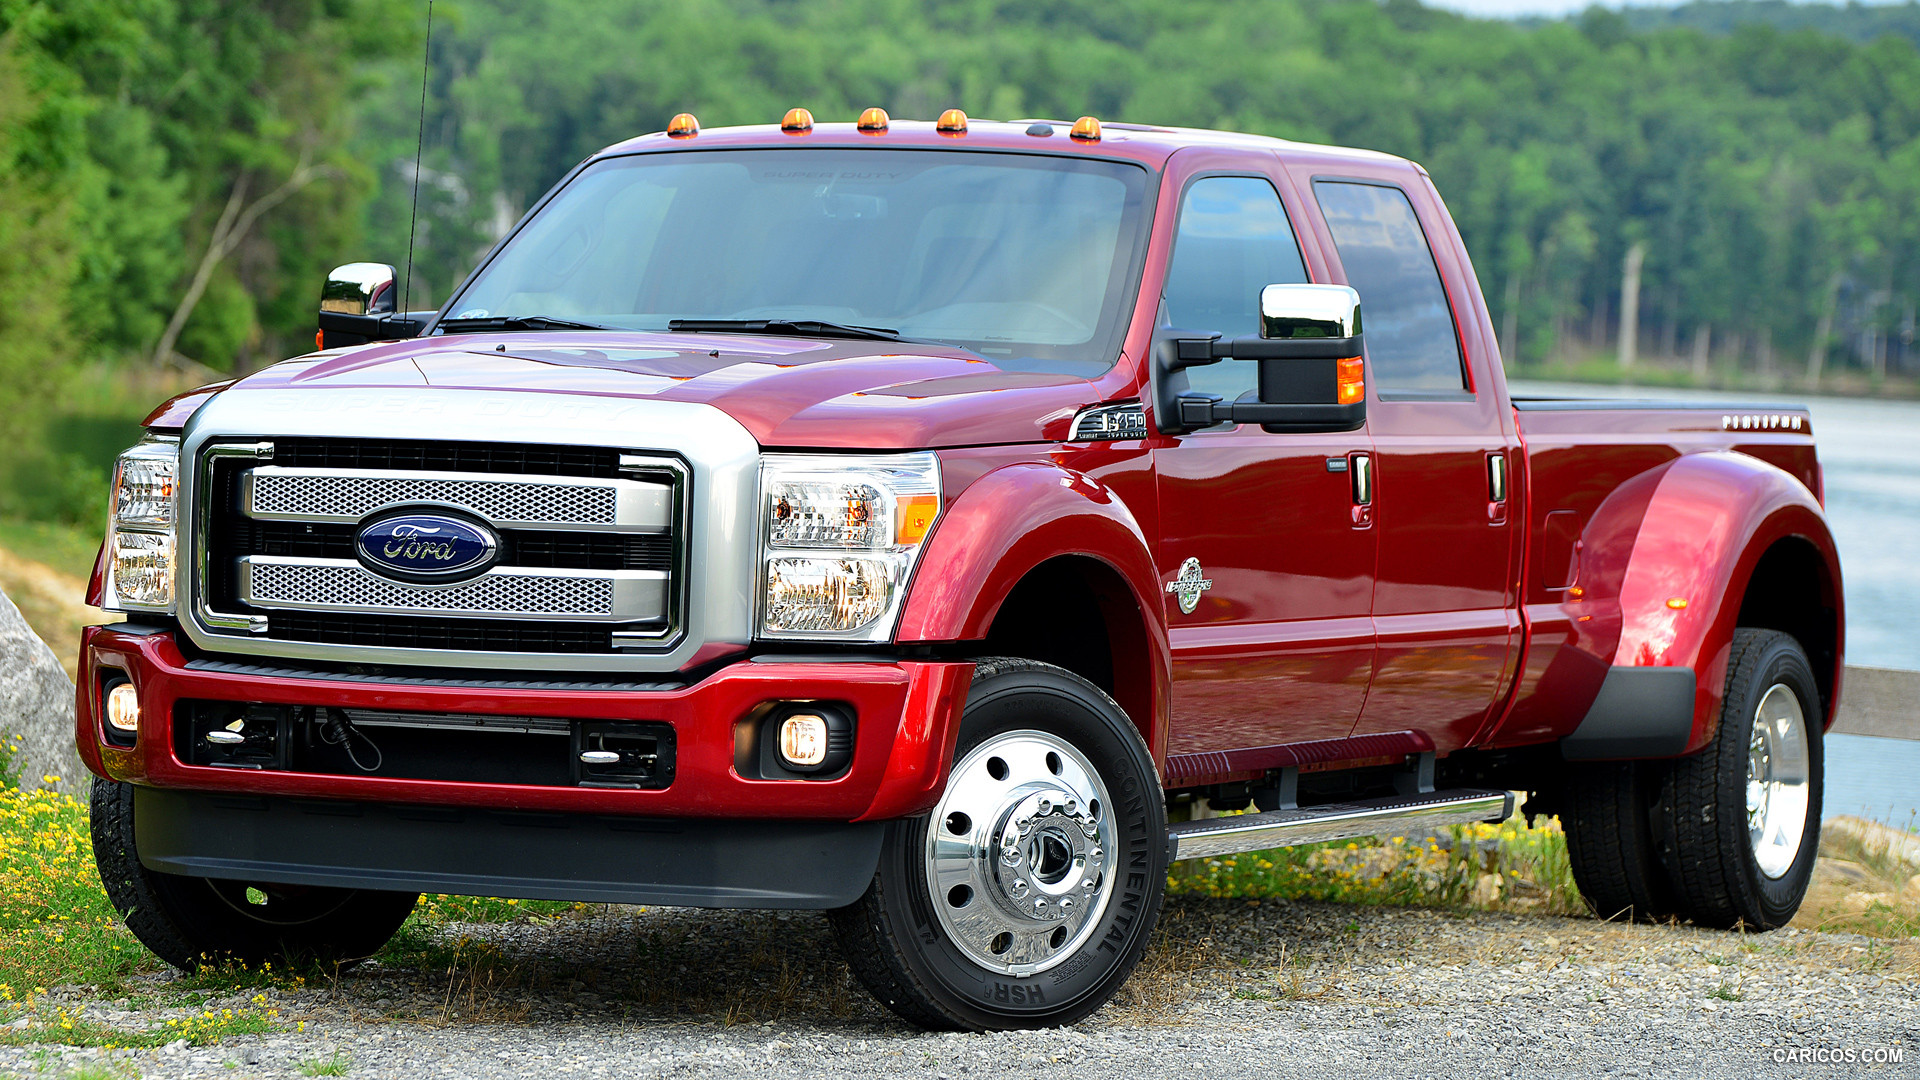 Amazing 2015 Ford F-Series Super Duty Pictures & Backgrounds